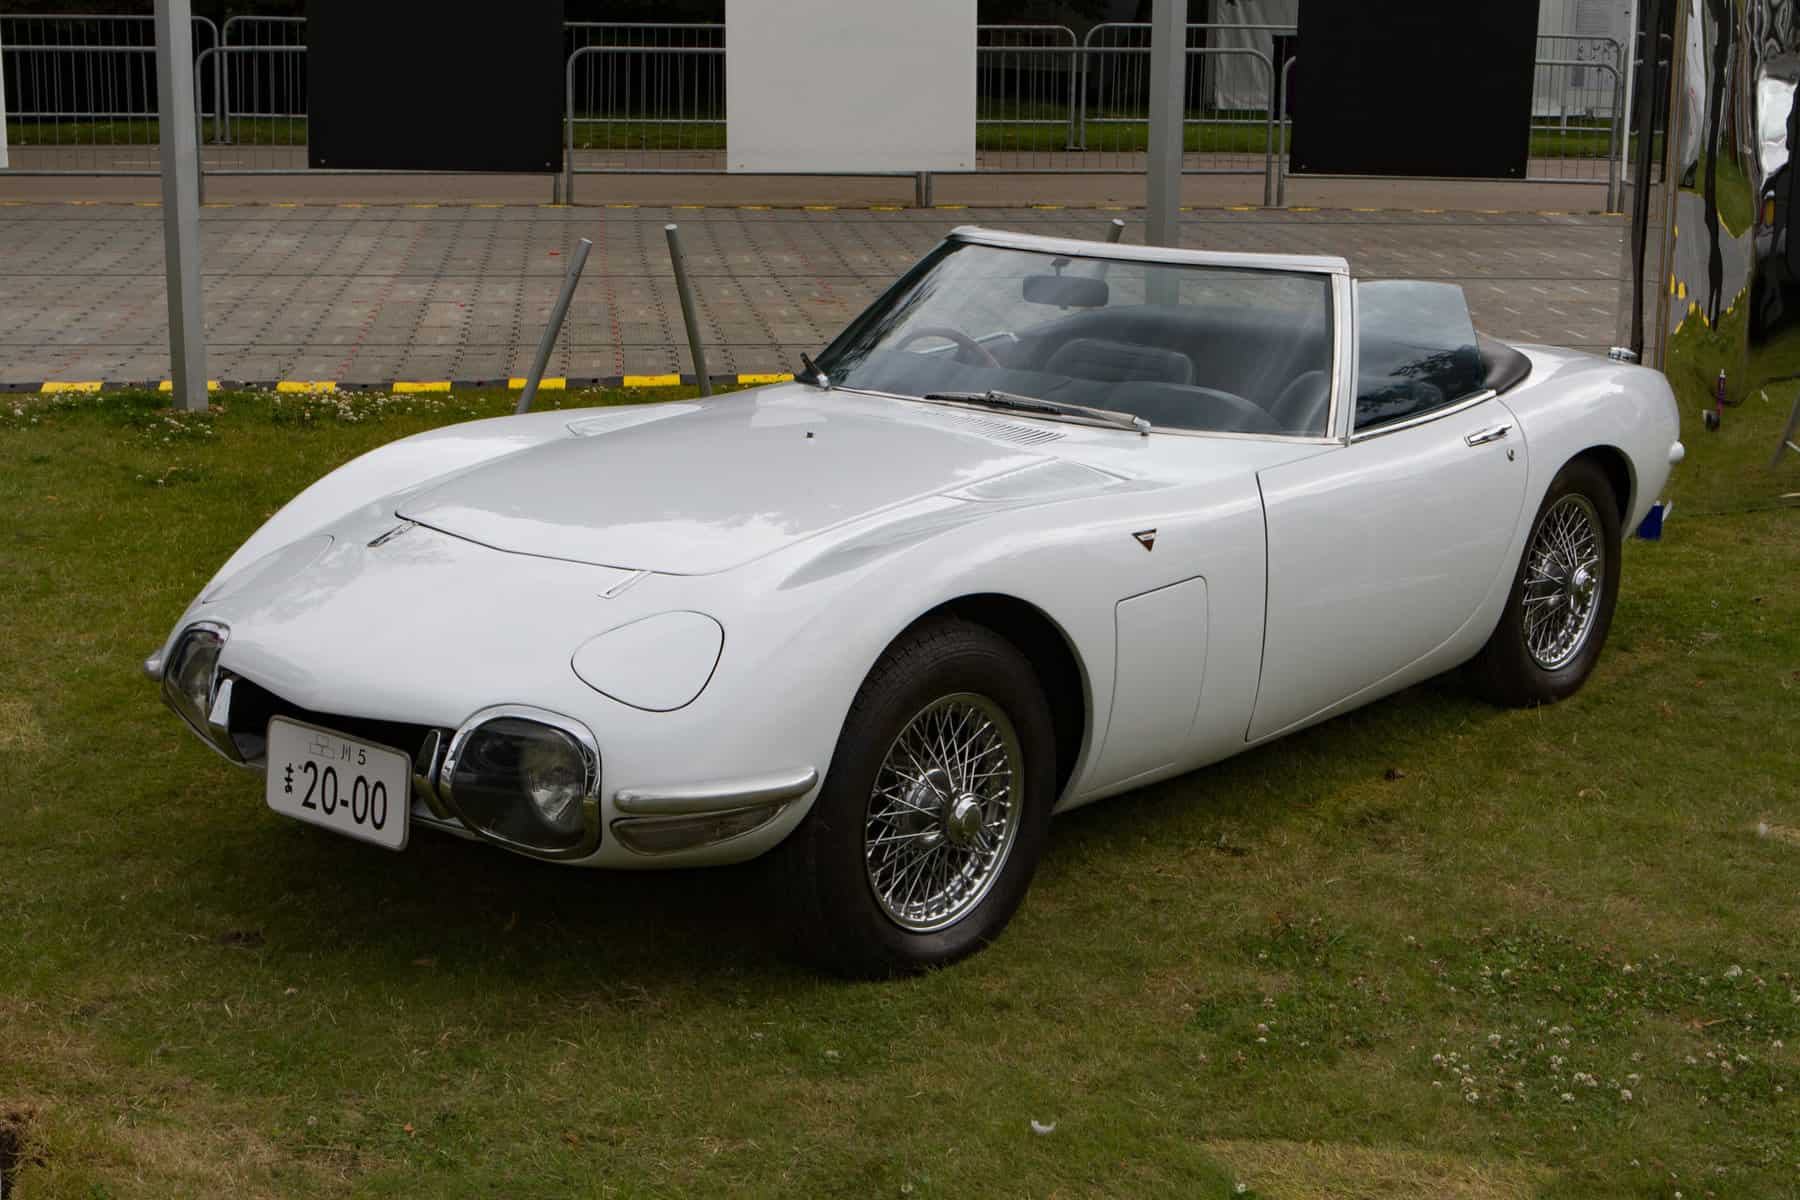 Toyota 2000 GT - The birth of the first Japanese supercar